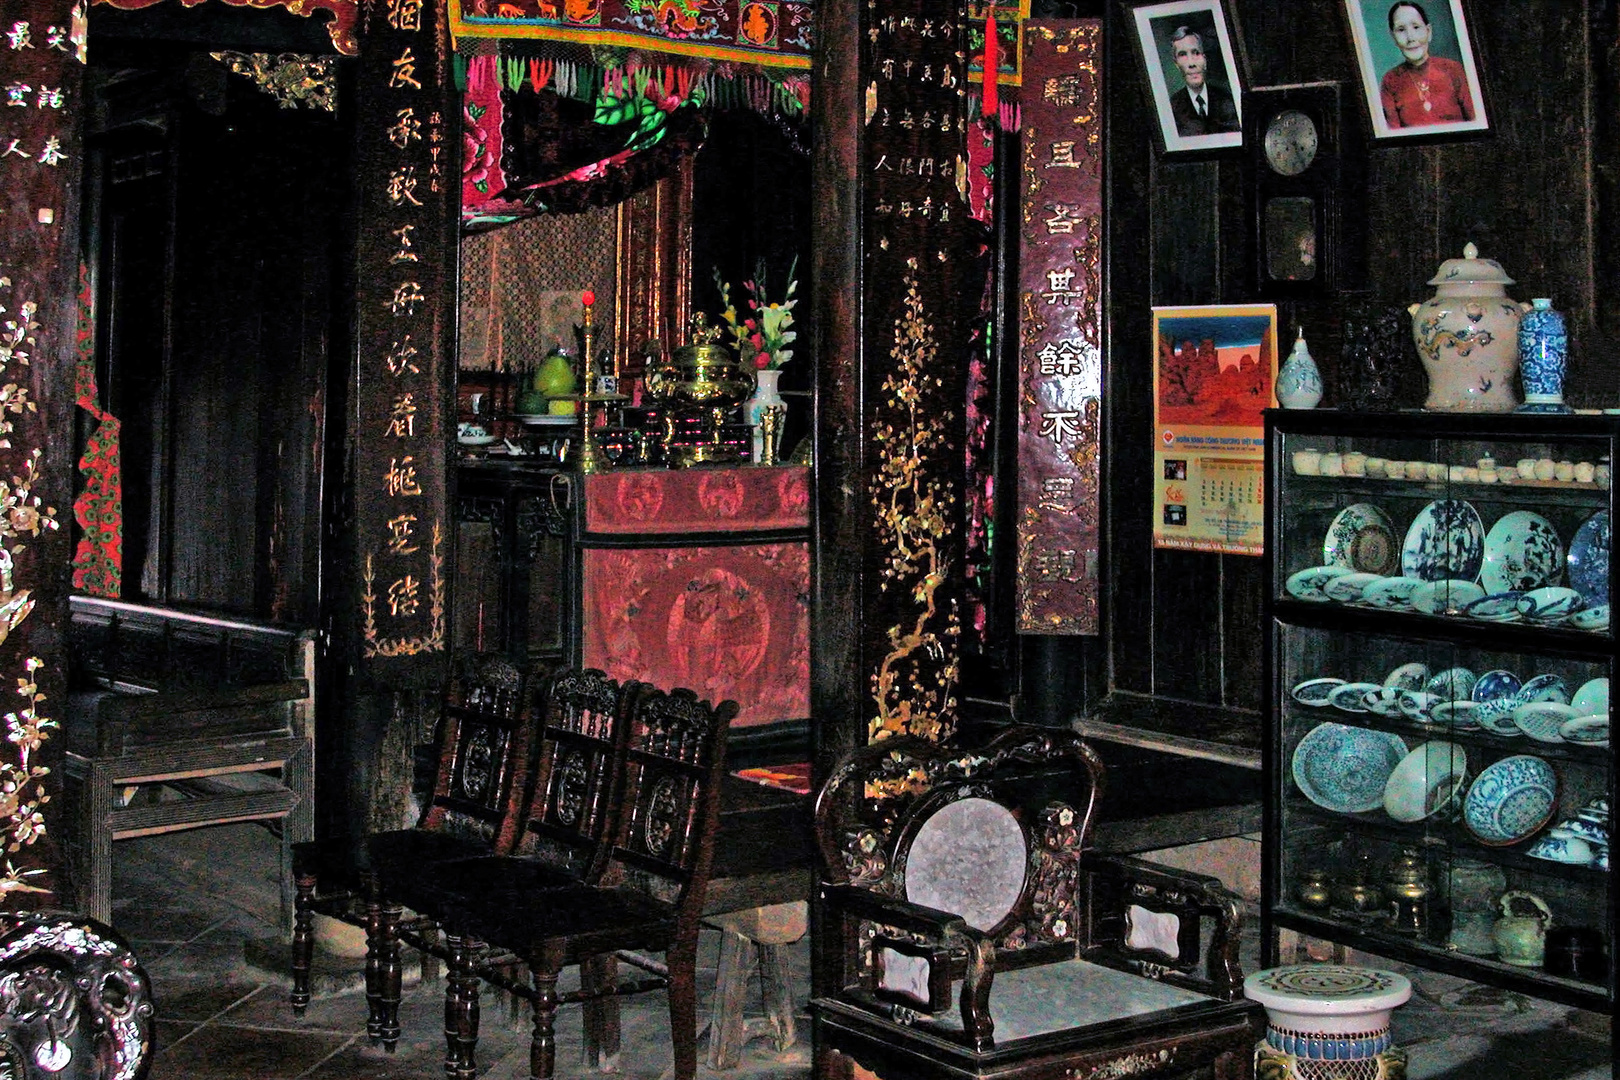 Inside private house in Hoi An